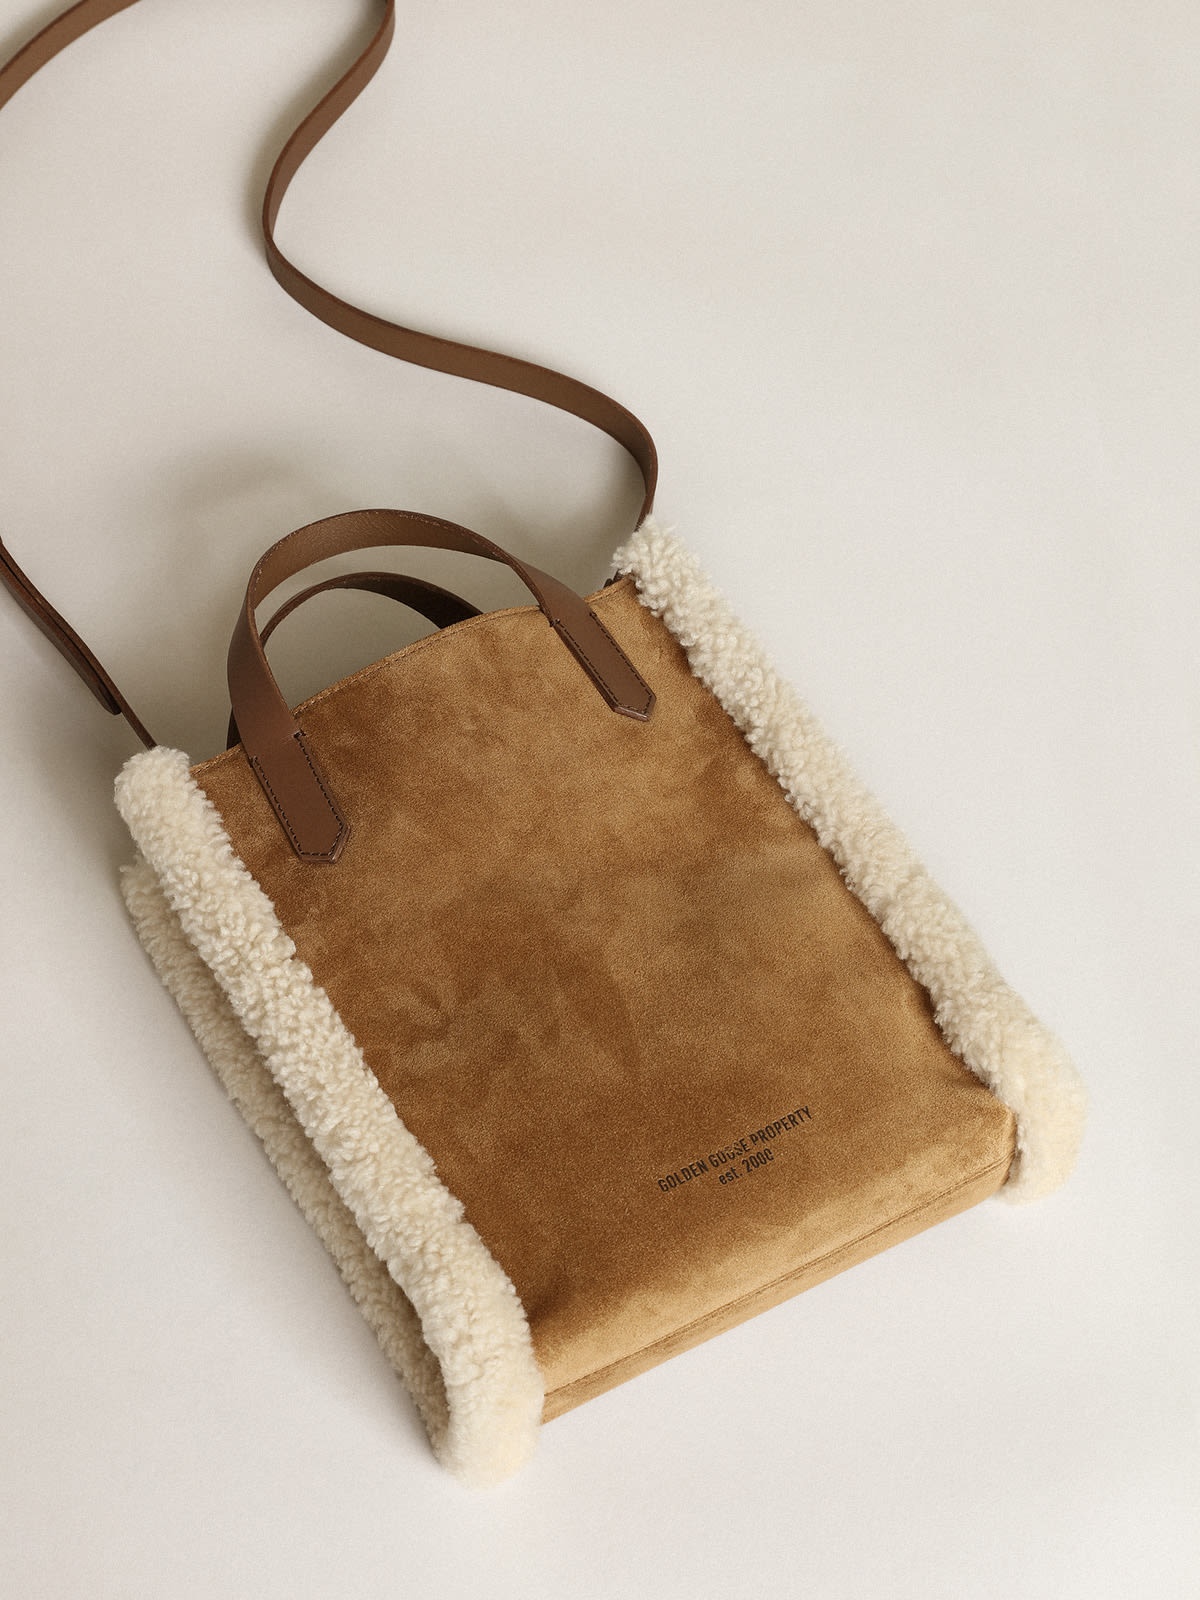 Mini California Bag in suede leather with shearling trim - 4